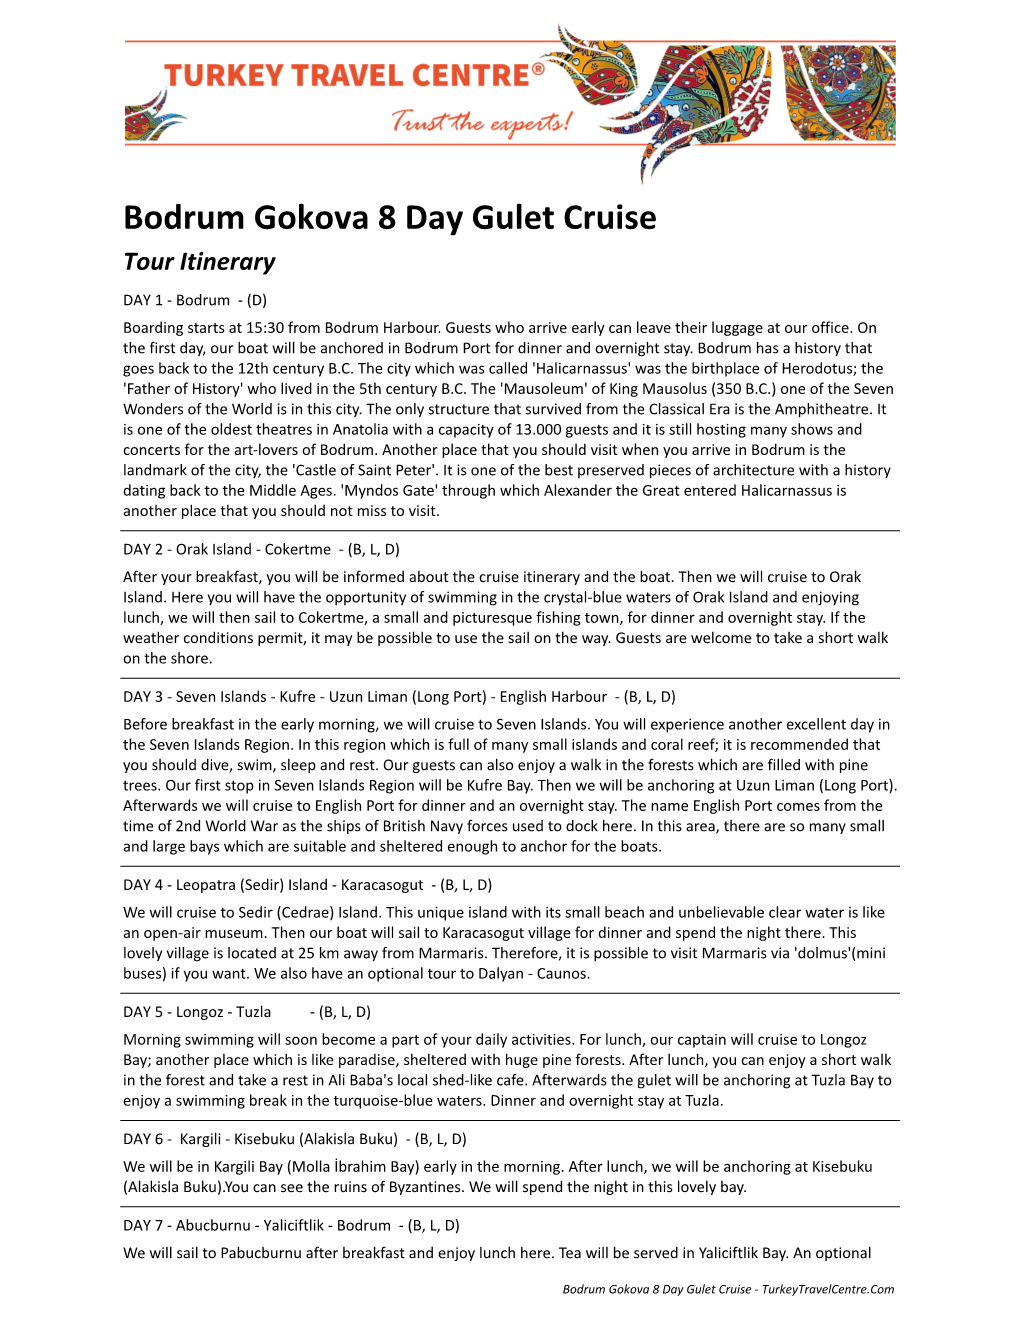 Bodrum Gokova 8 Day Gulet Cruise Tour Itinerary DAY 1 - Bodrum - (D) Boarding Starts at 15:30 from Bodrum Harbour